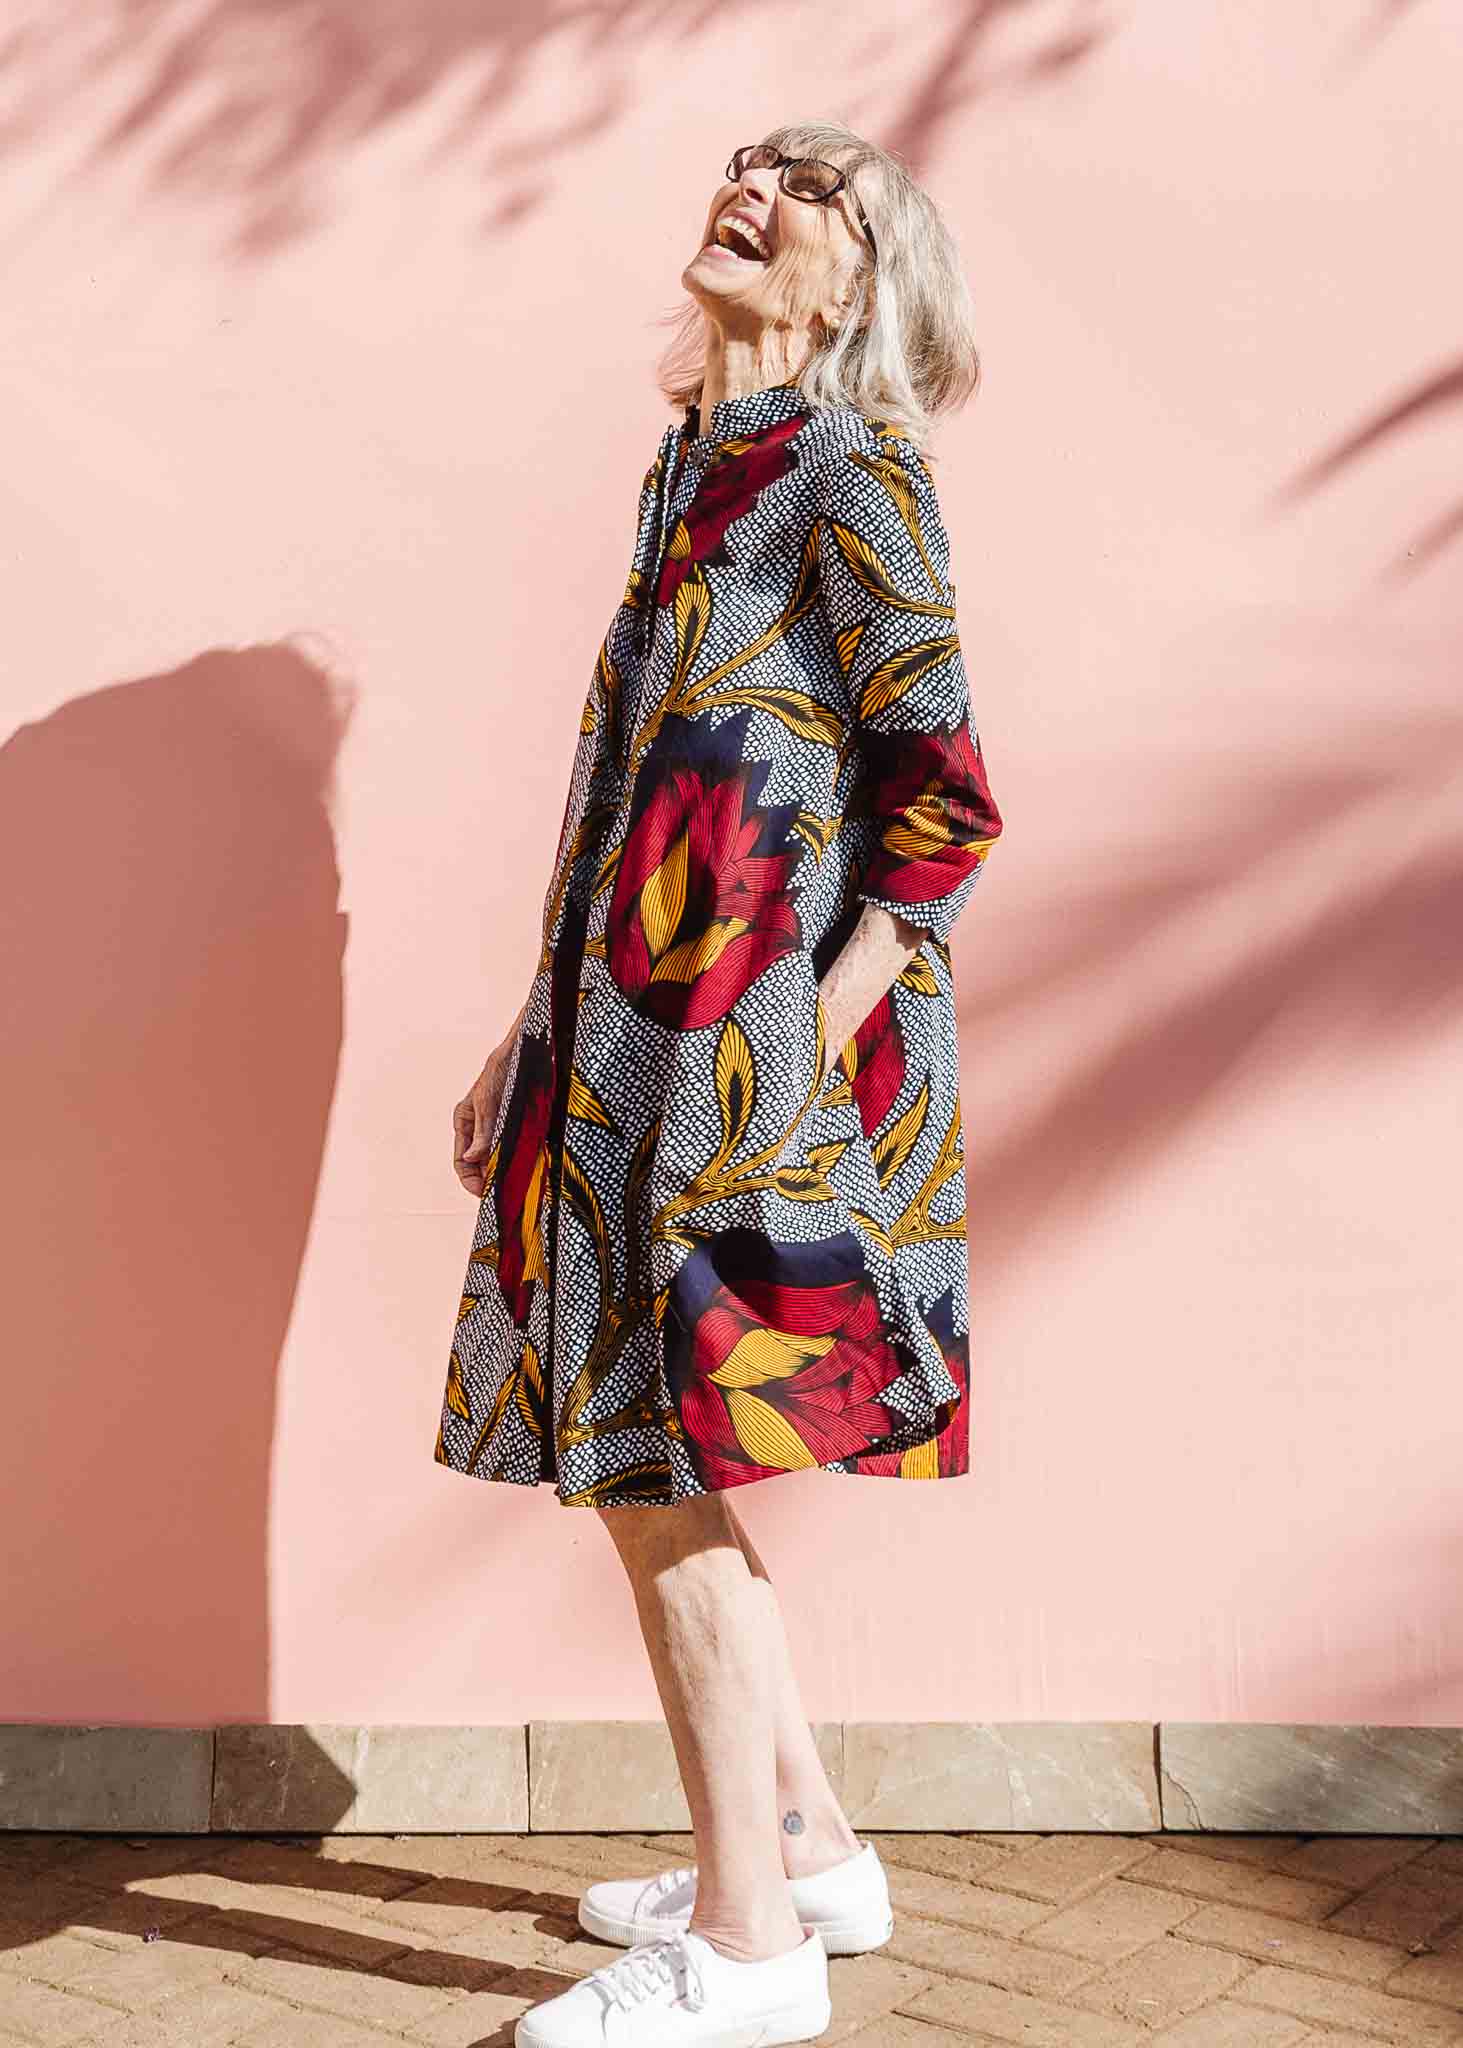 Model wearing red, yellow and navy flower print dress.